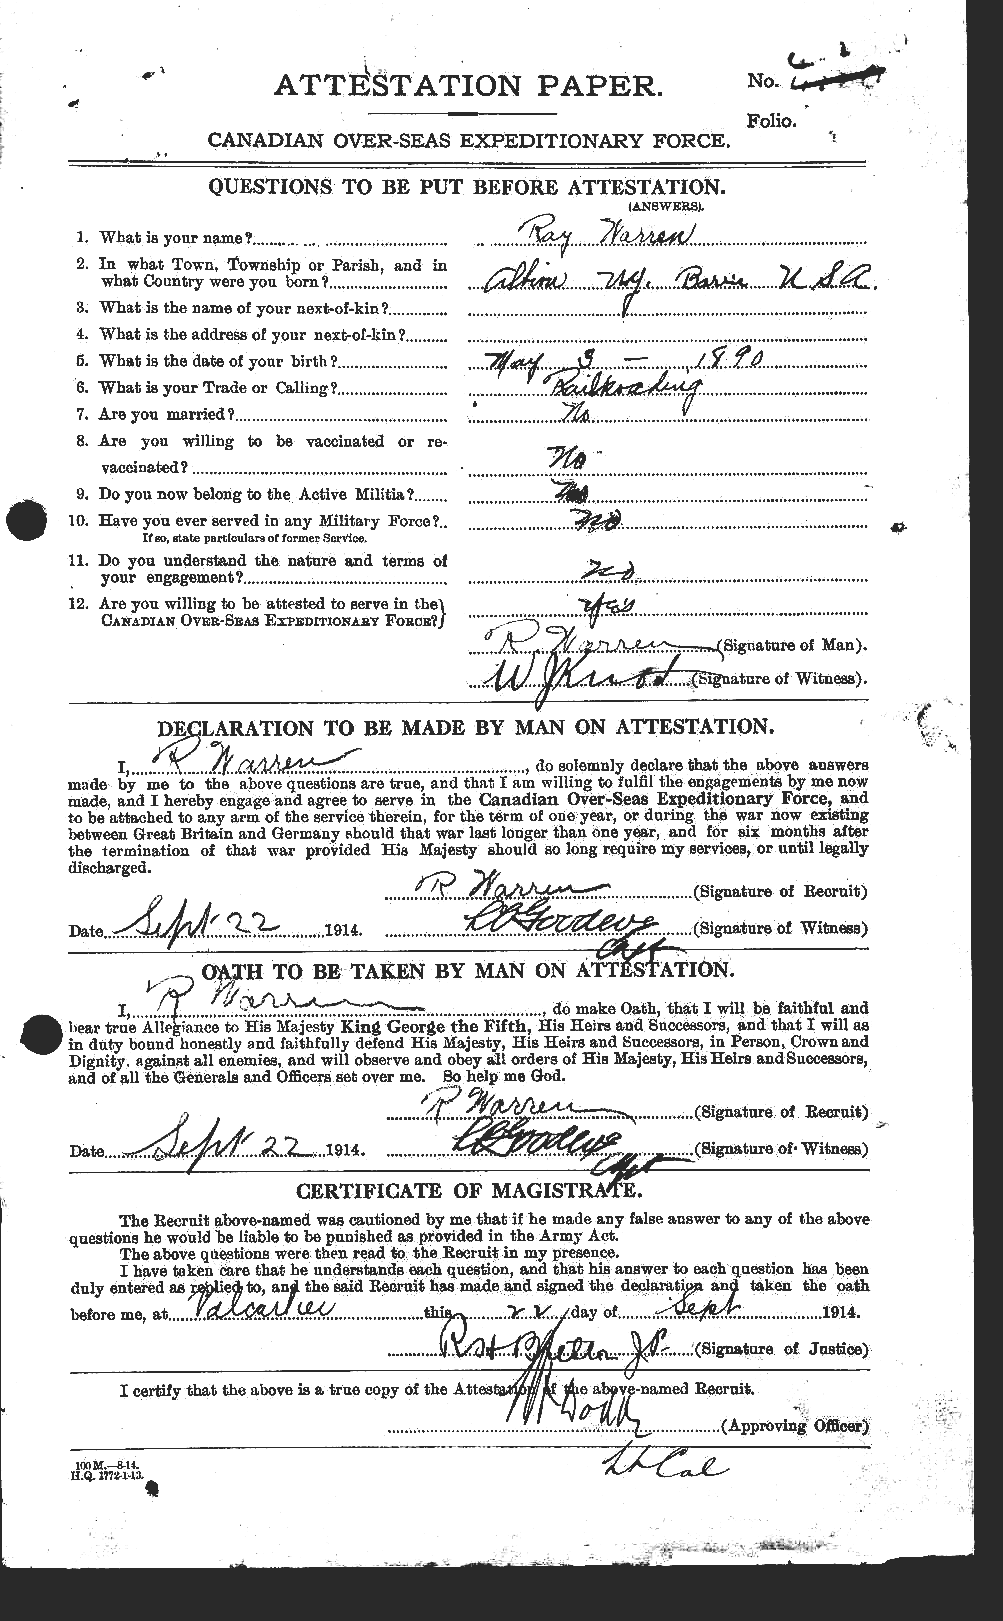 Personnel Records of the First World War - CEF 658614a